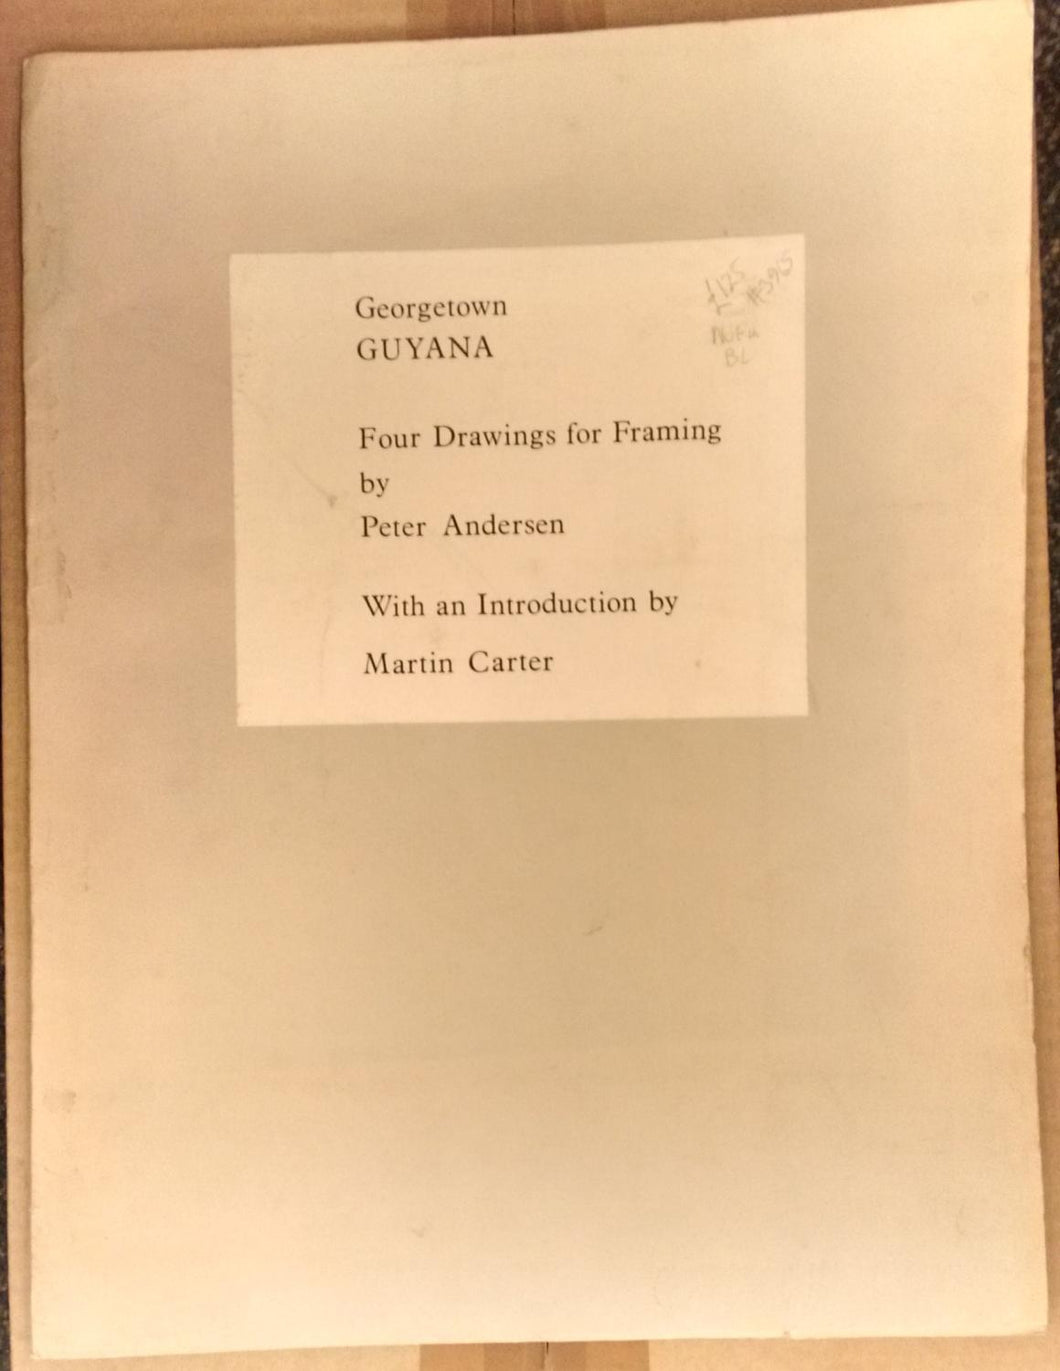 Georgetown Guyana. Four Drawings for Framing. With an Introduction by Martin Carter.